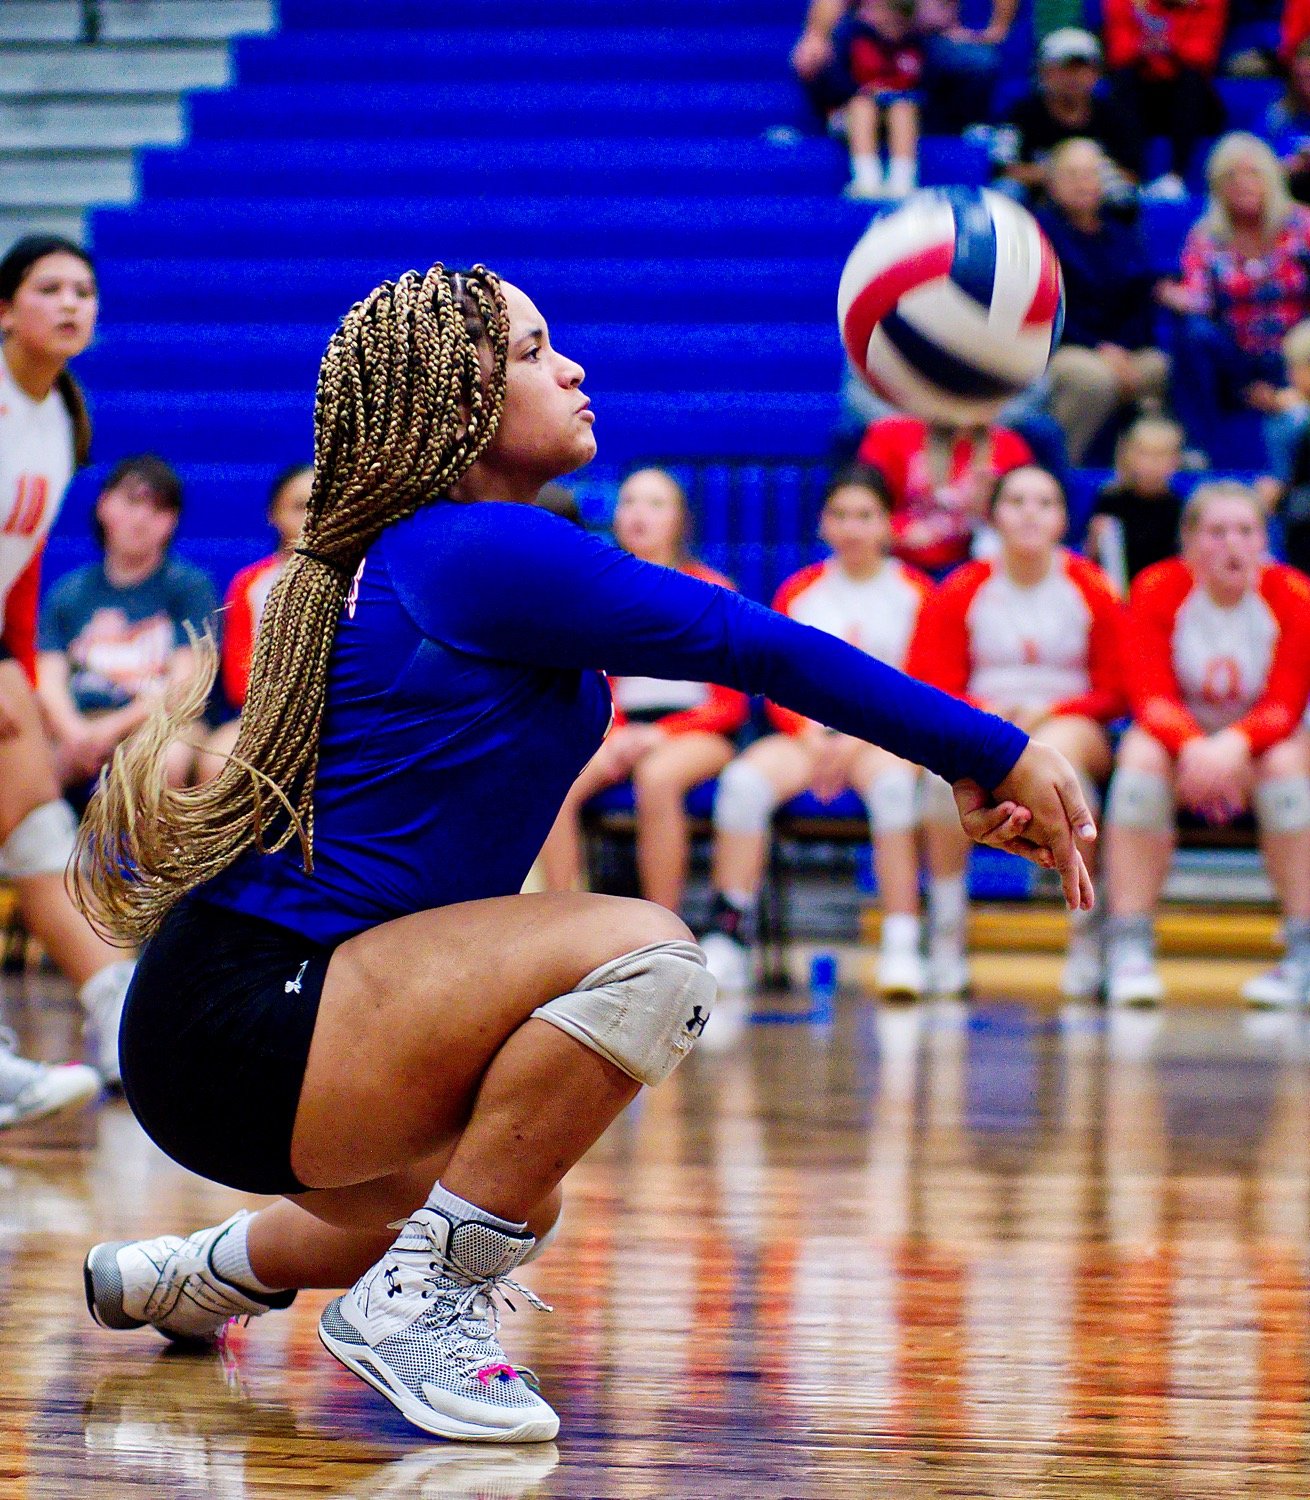 Mineola libero Paris Spigner gets low for the dig. [view more volleyball shots]